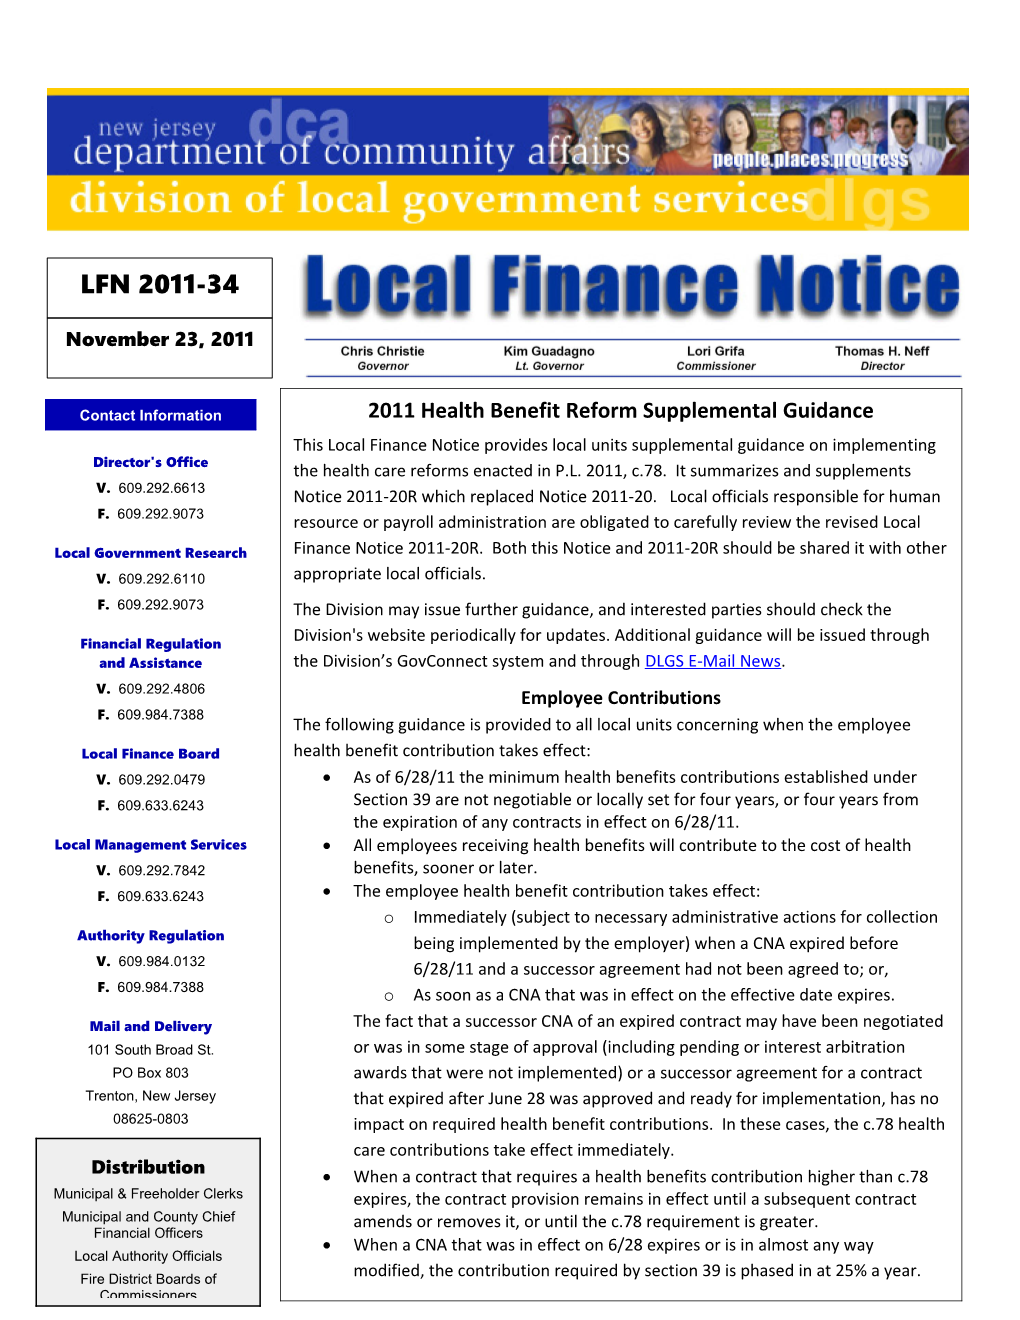 Local Finance Notice 2011-34November 23, 2011Page 1